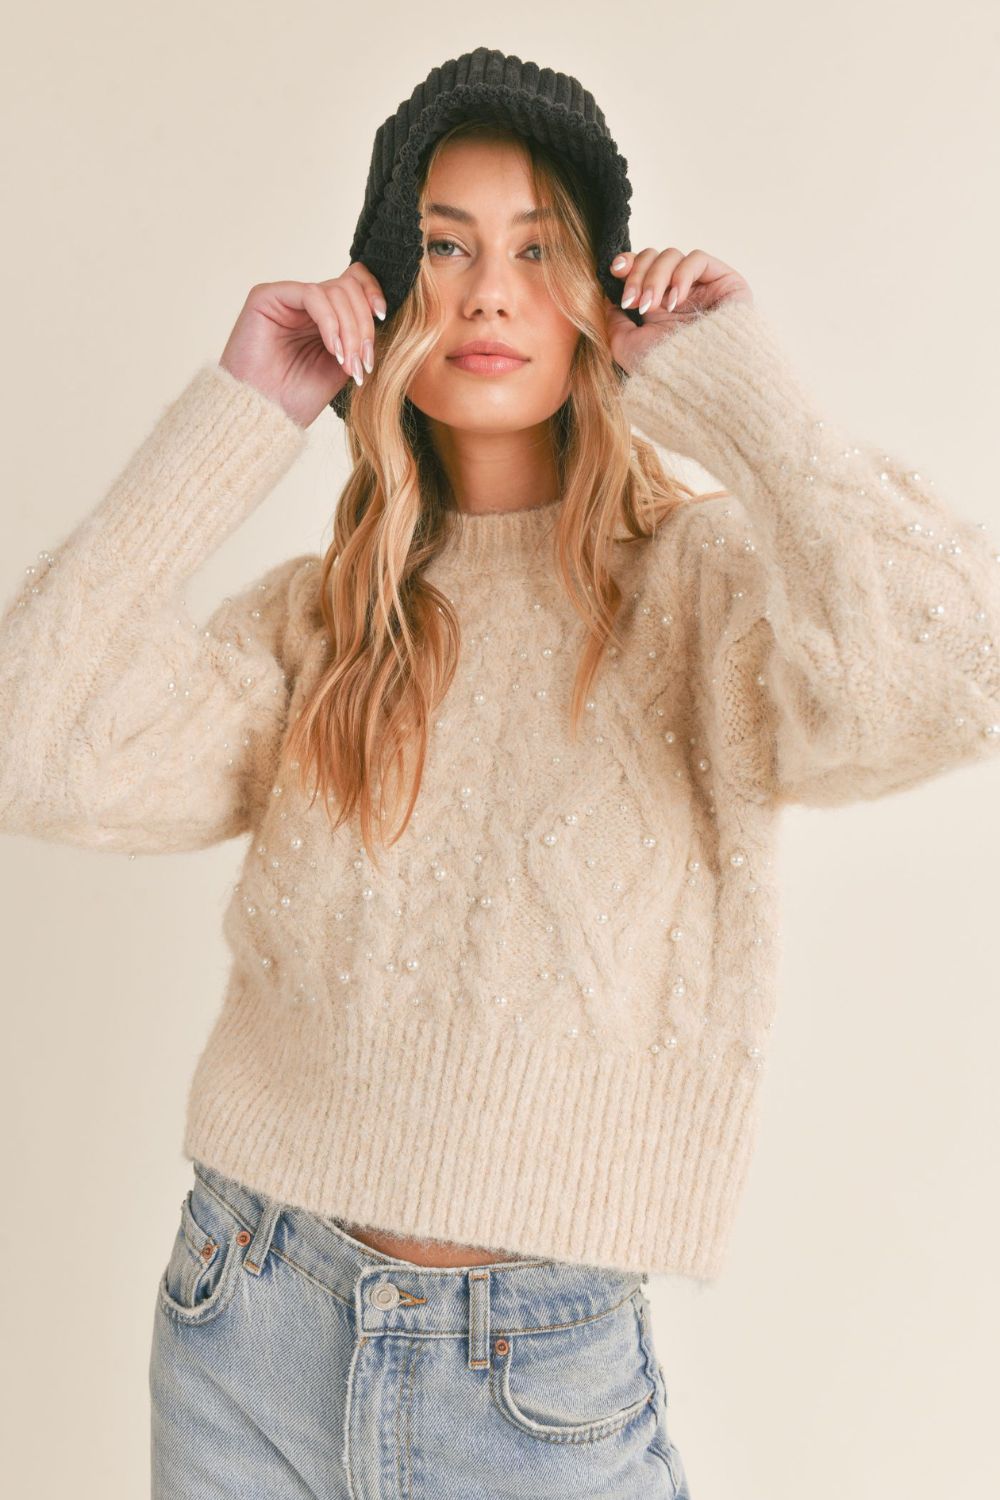 Knitted jumper with cable knit pattern made of soft blended wool